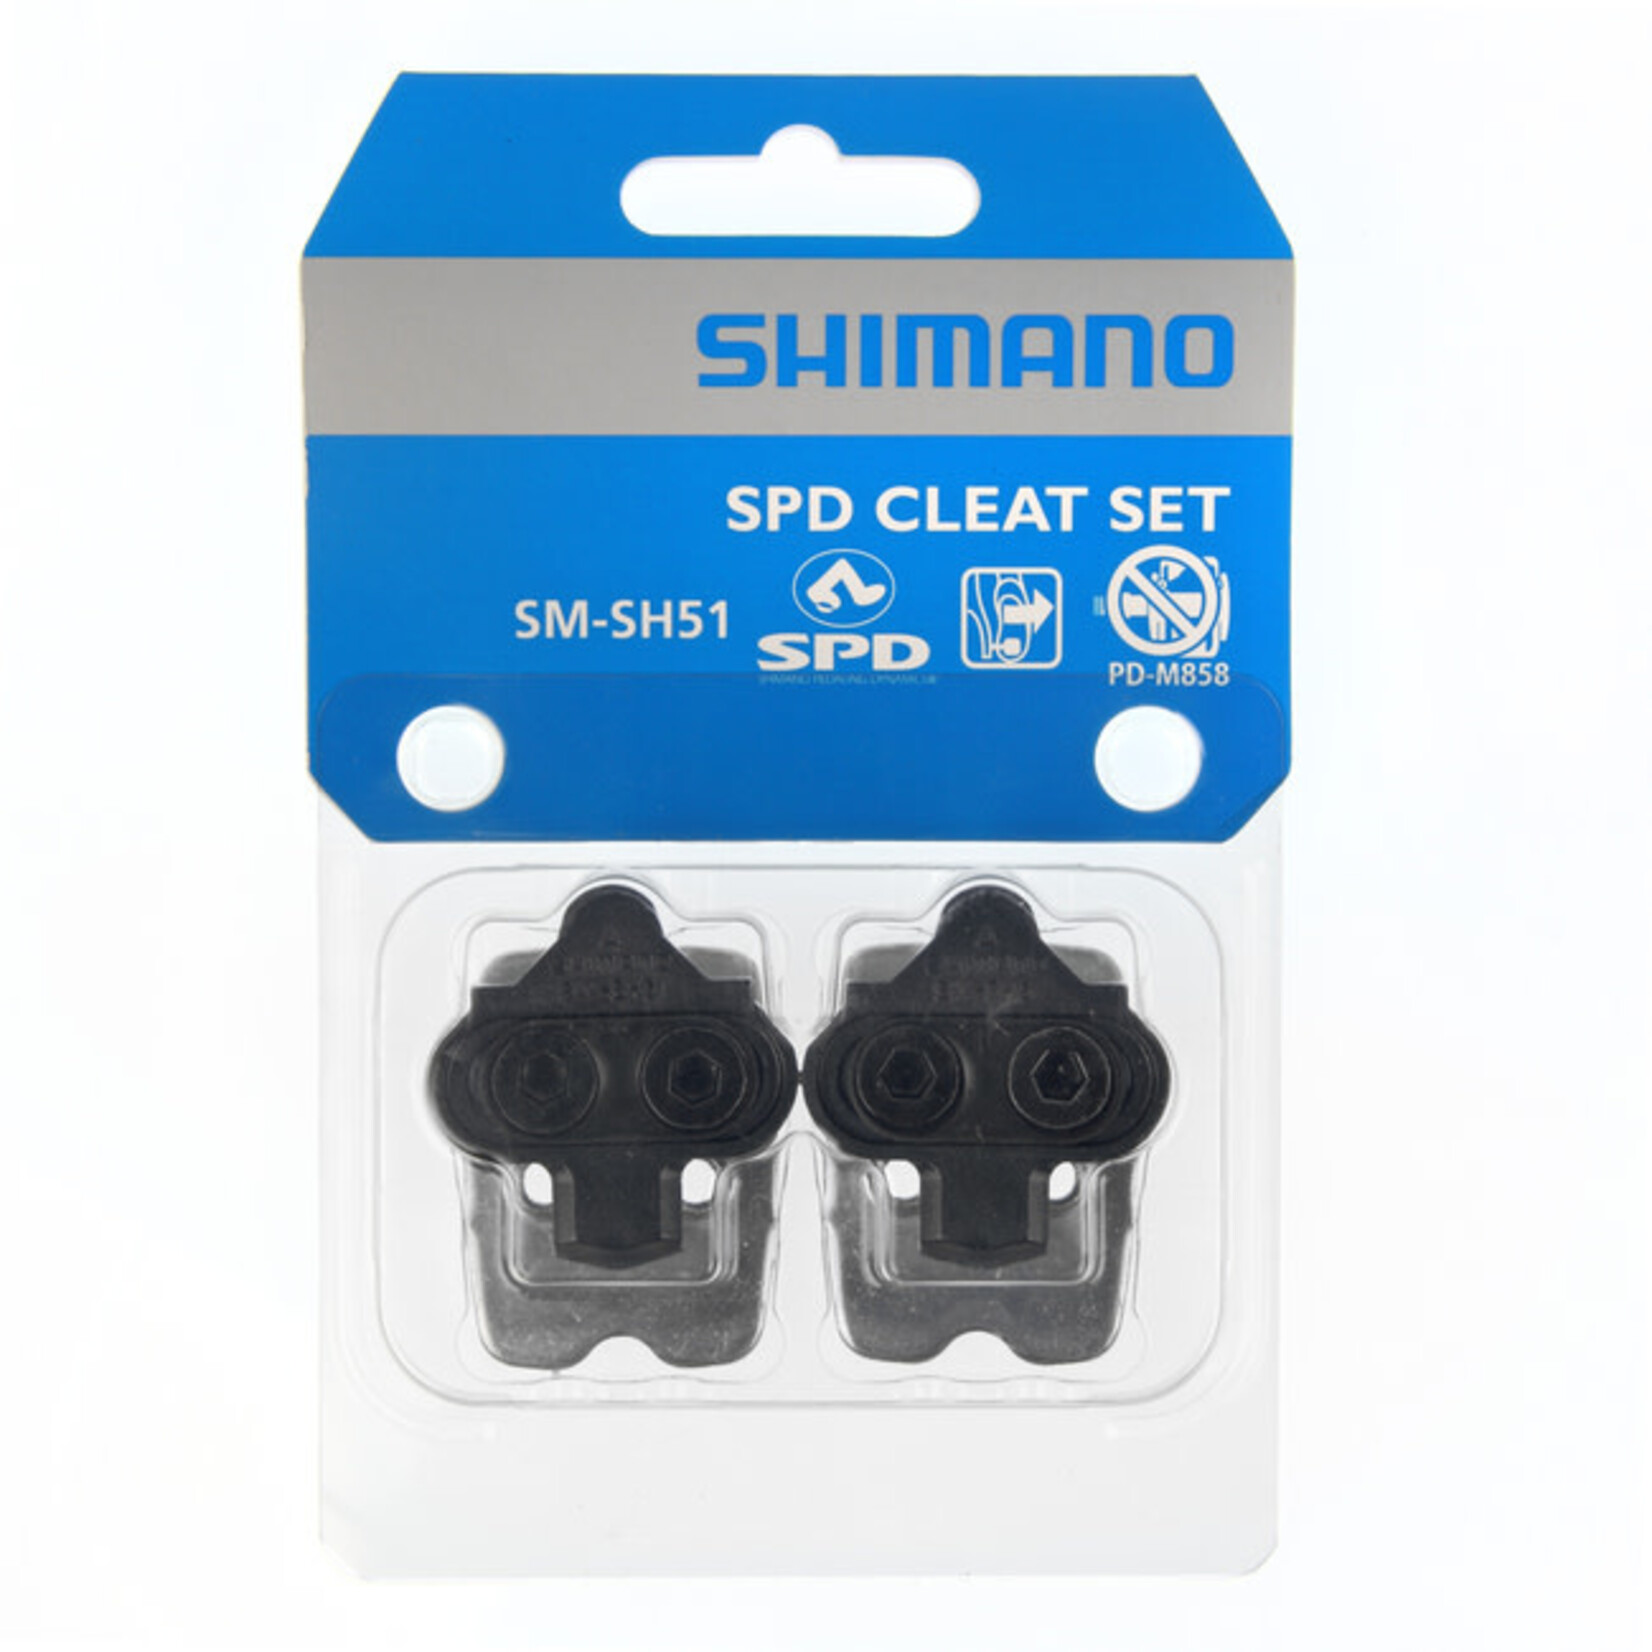 SHI SM-SH51 SPD CLEAT SET (PAIR) SINGLE RELEASE W/ CLEAT NUT